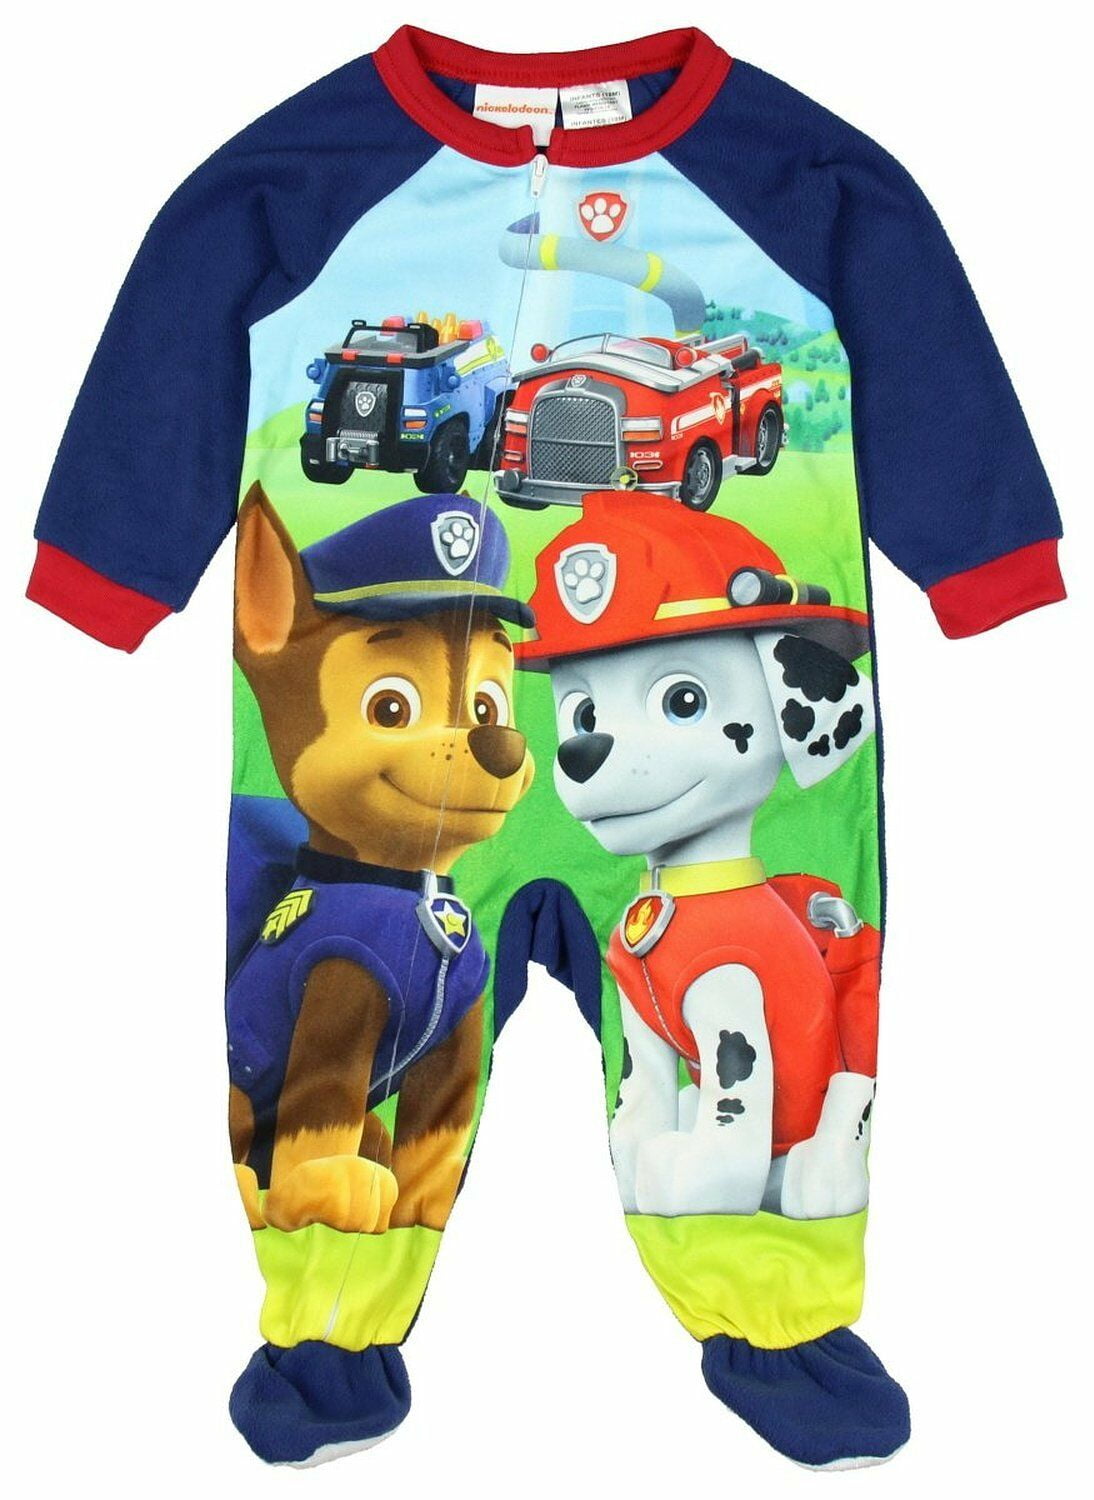 Details about   Nickelodeon Paw Patrol Footed Sleeper Blanket Pajama Boy Size 5T 